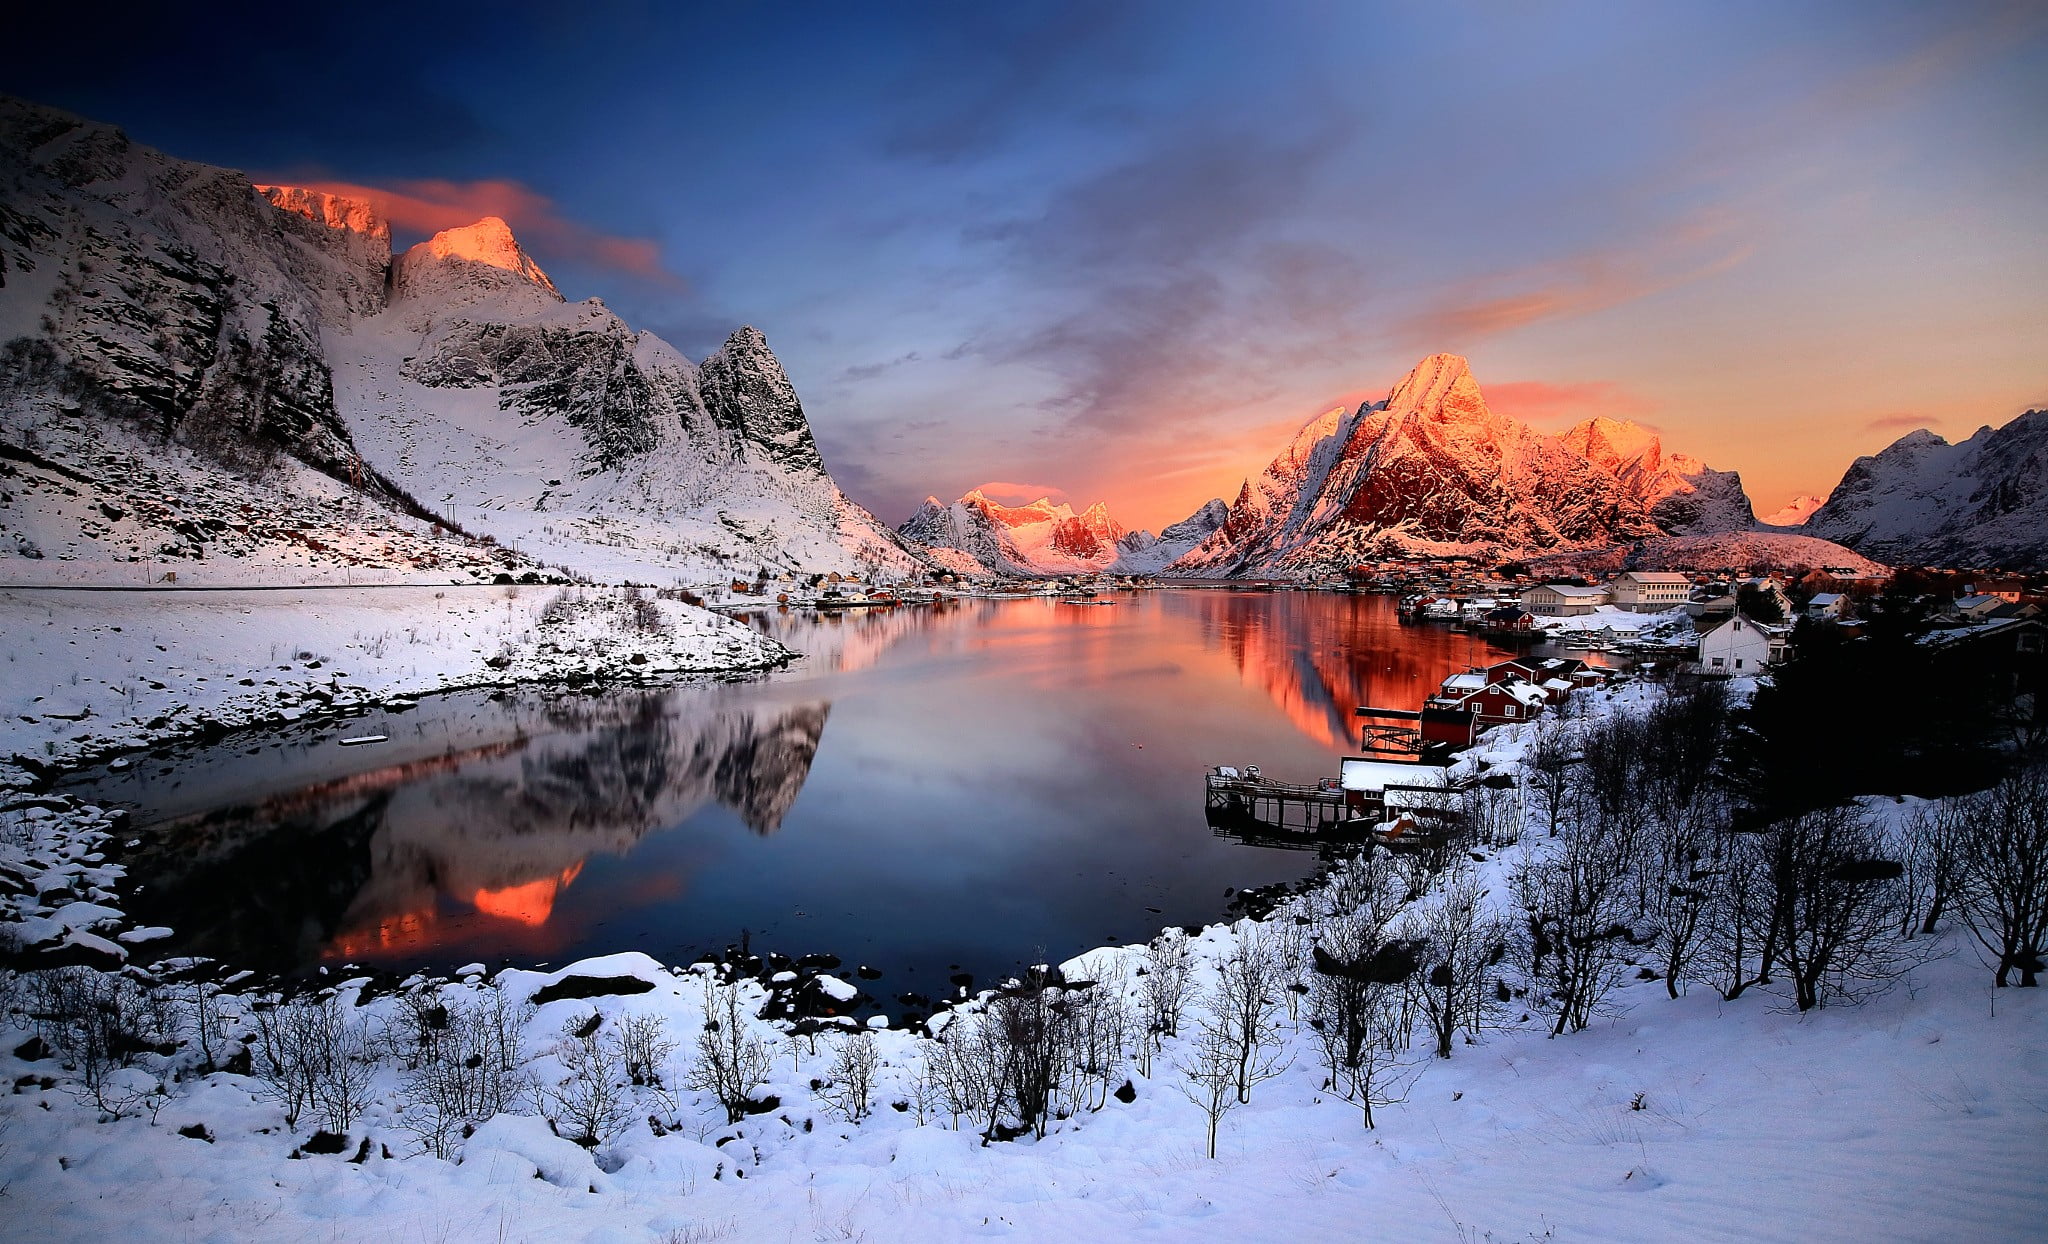 landscape photography of body of water surrounded with mountains, Norway, winter, nature, landscape